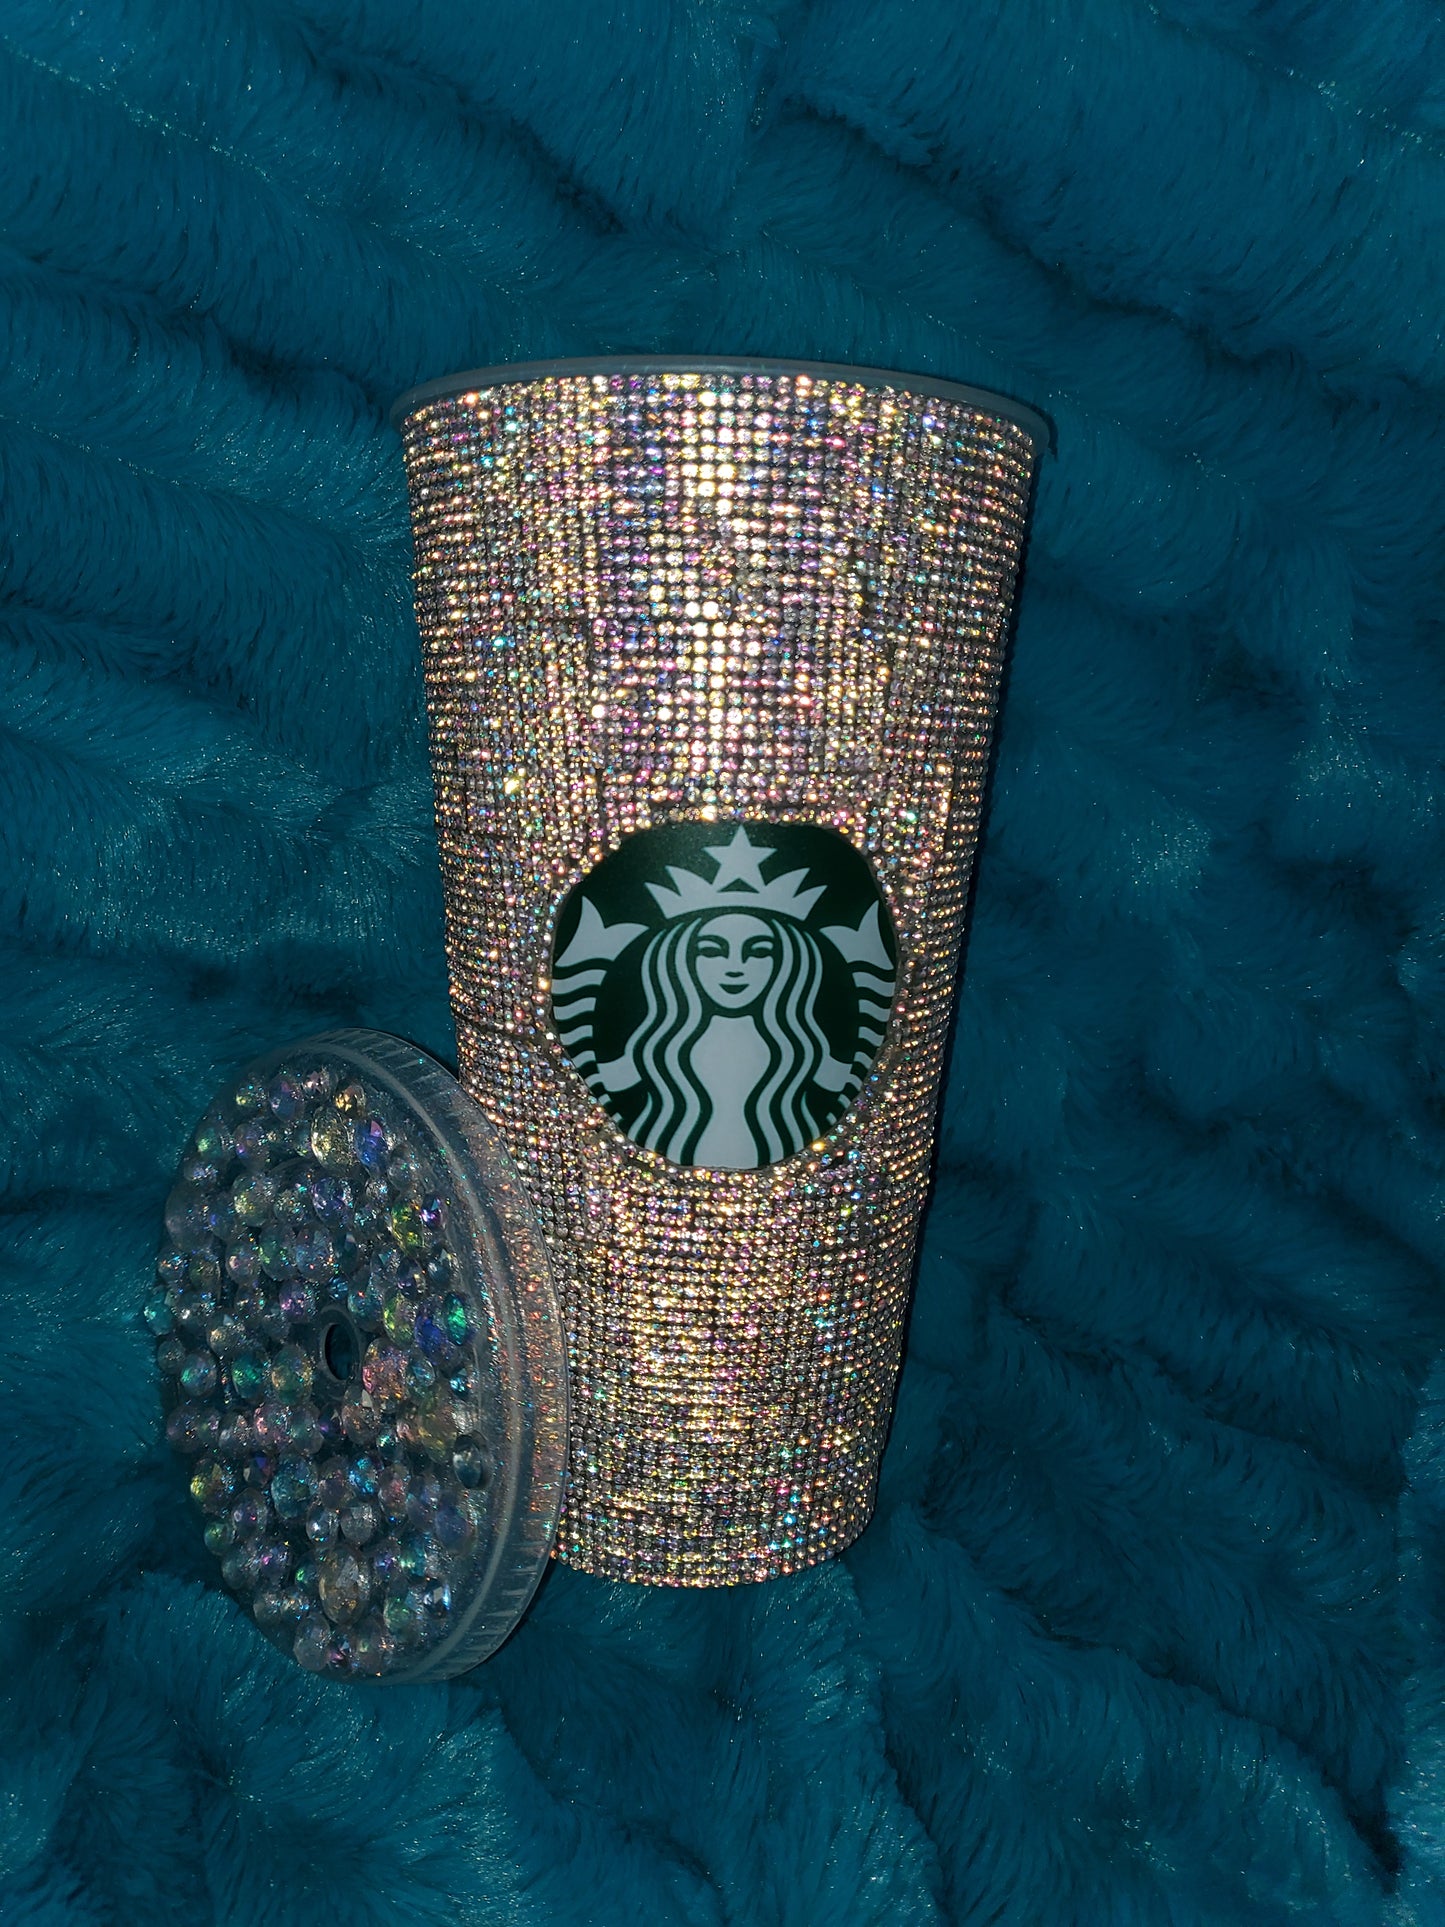 Full Rhinestone Venti Cold Cup with Lid SOLD OUT